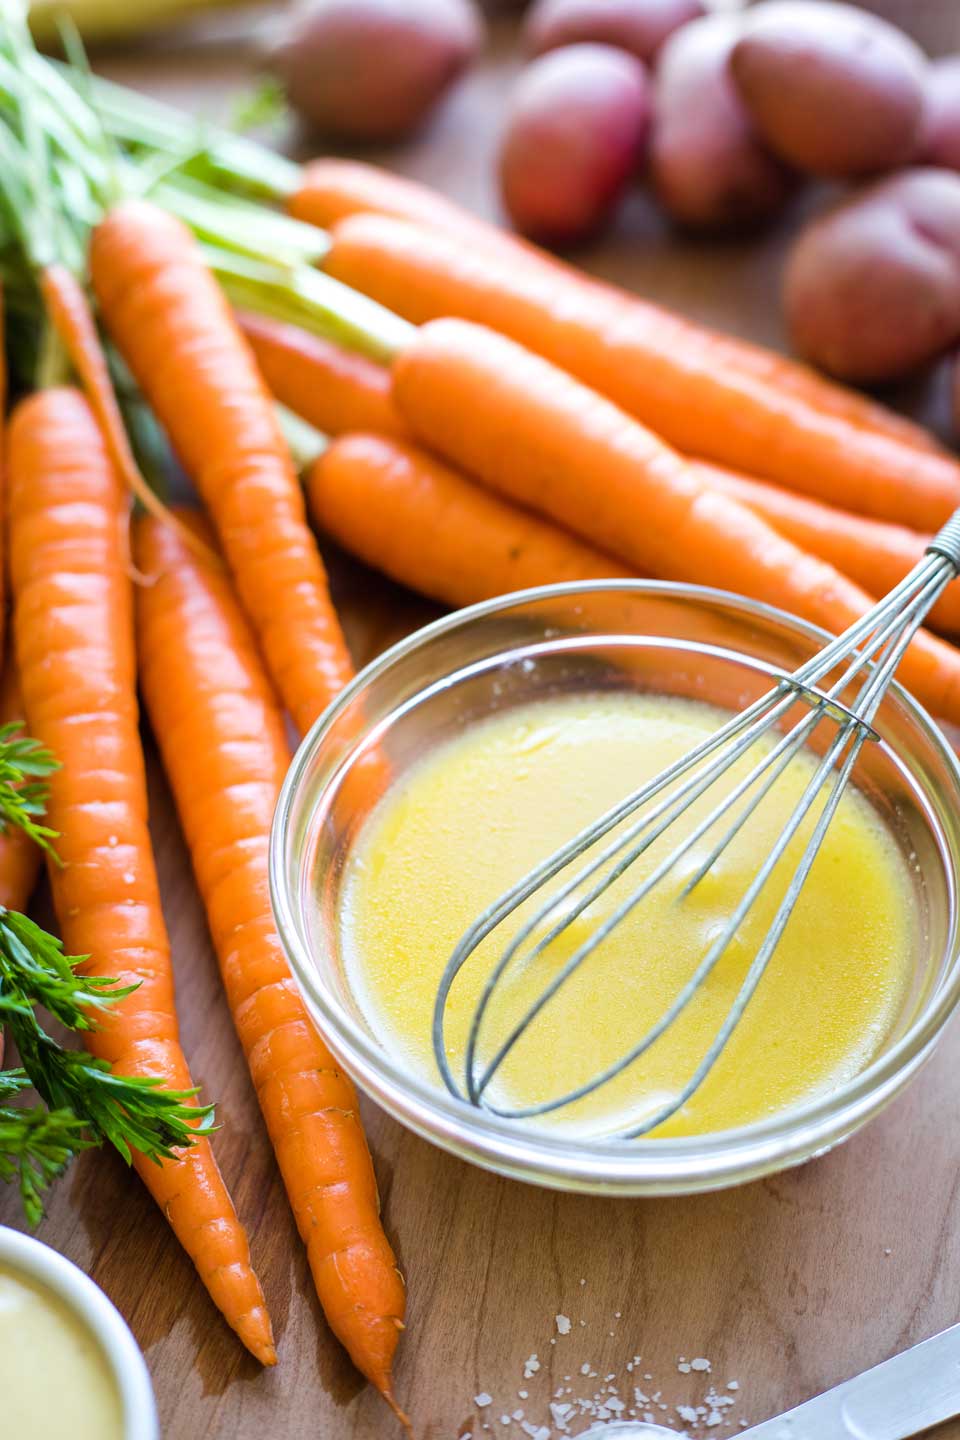 small bowl of Honey-Dijon Drizzle with whisk, nestled among raw carrots on cutting board